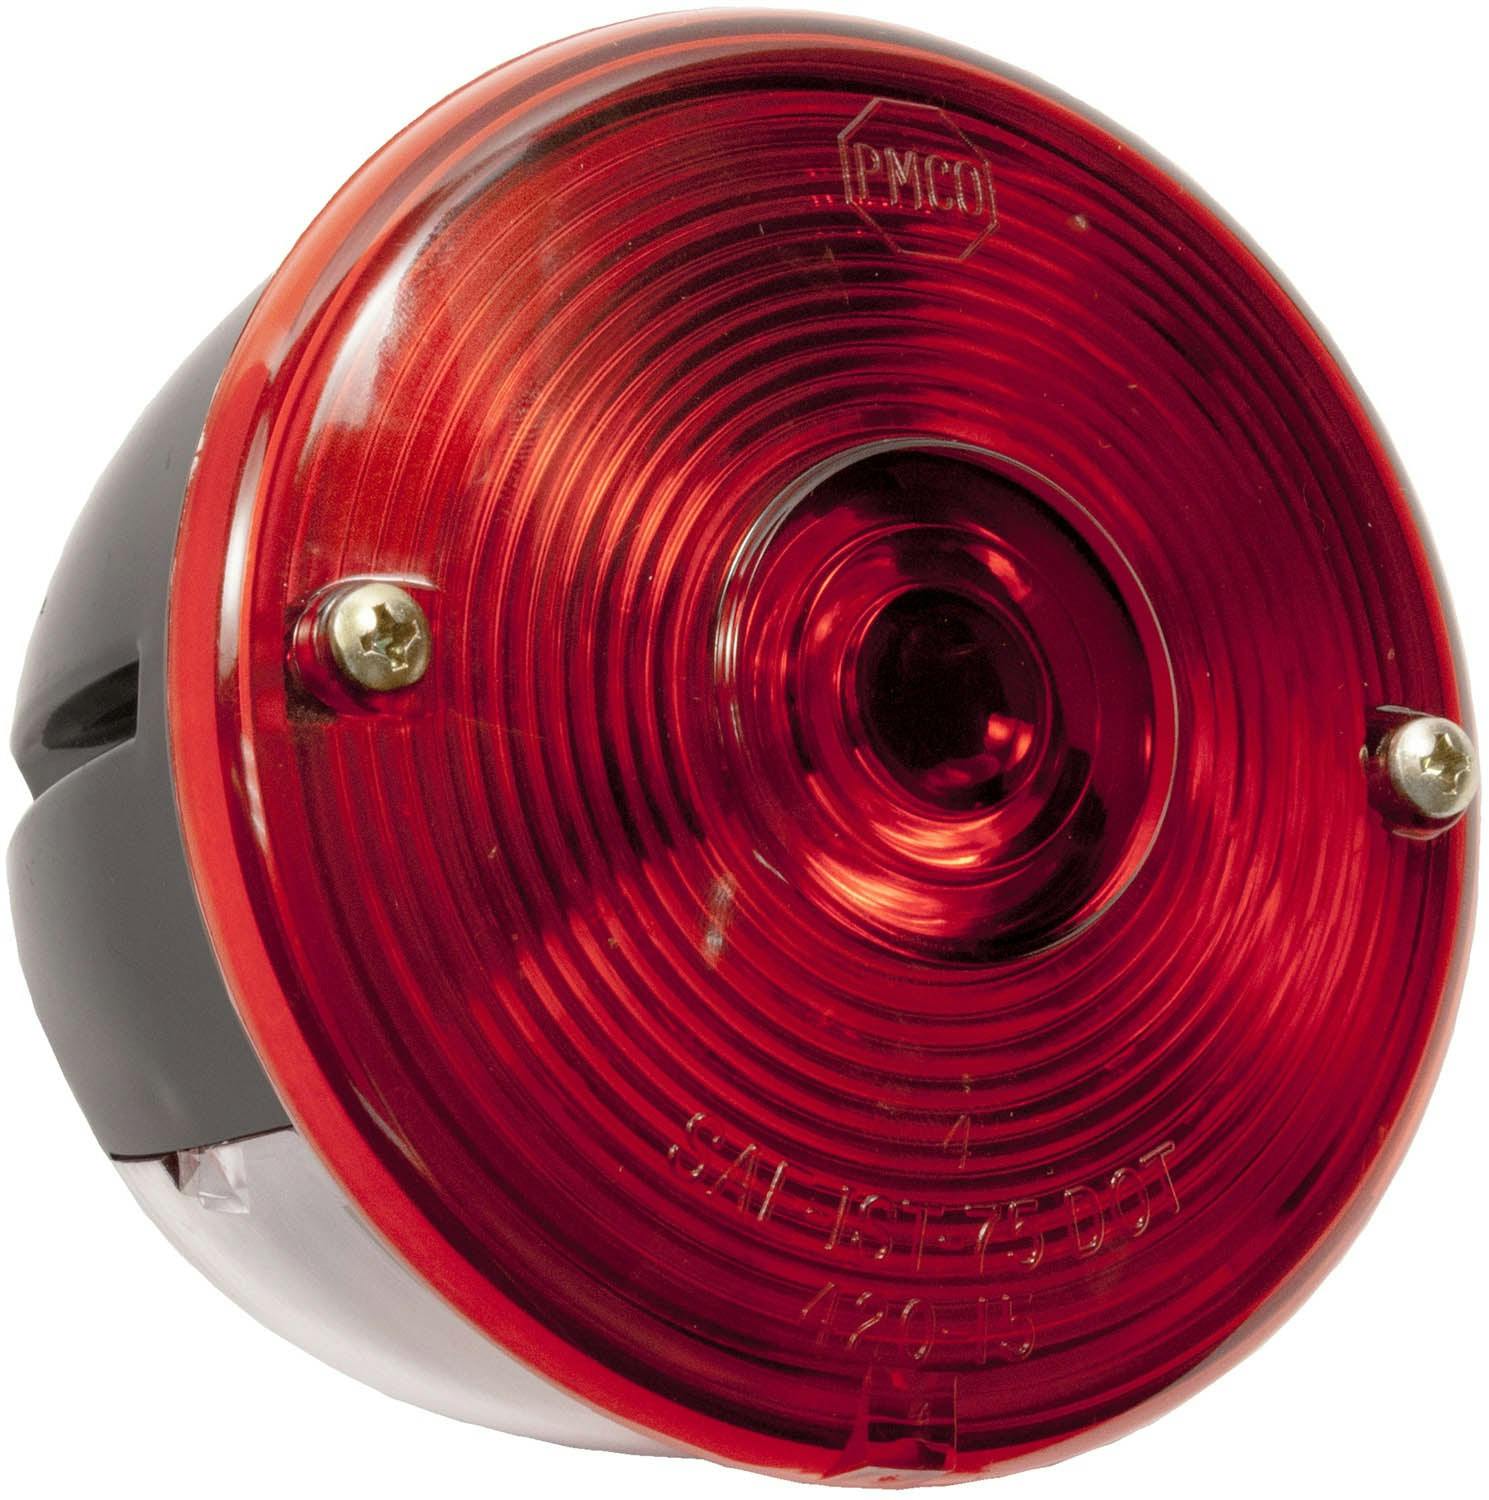 Incandescent Stop/Turn/Tail, Universal, Round, Stud-Mount, w/ License Light, 3.75"X2.625", red, bulk pack (Pack of 60)